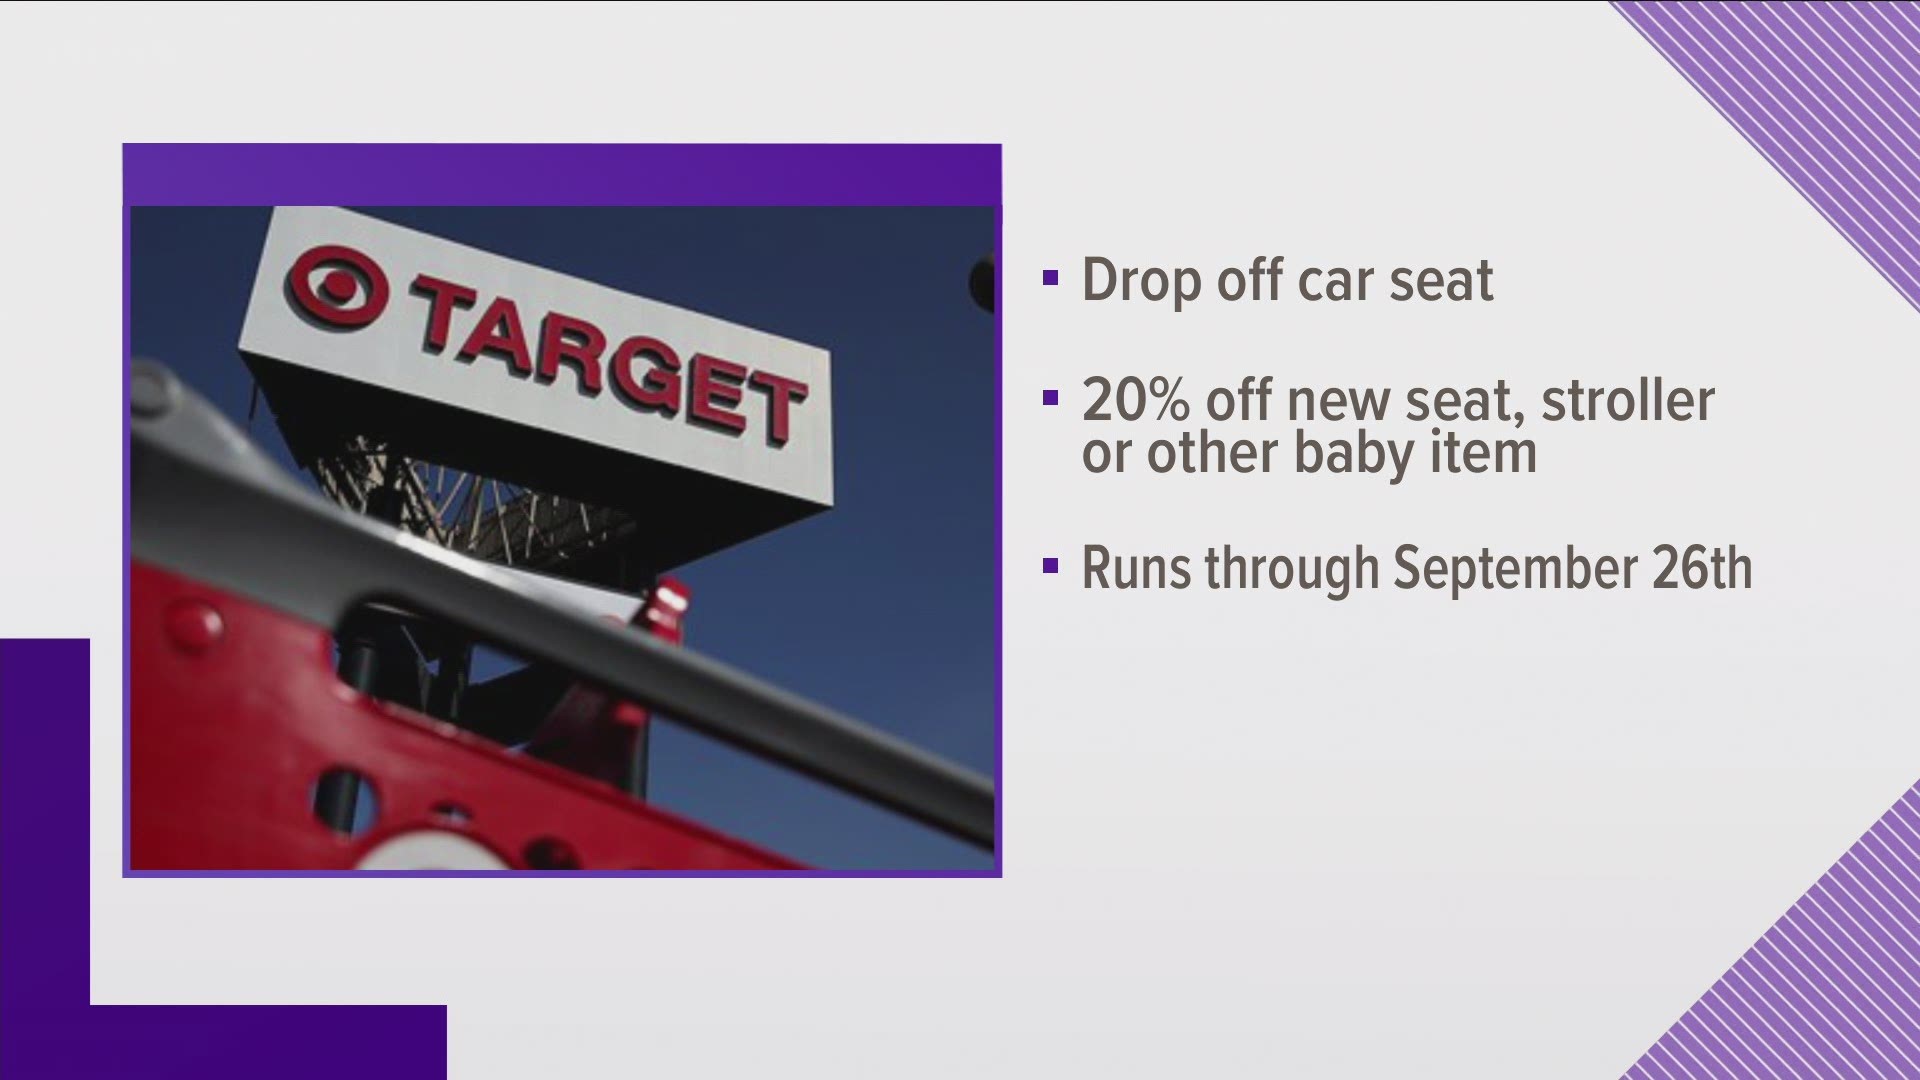 Target's car seat trade-in event lets you recycle your old car seat. In exchange, Target will give you a 20 percent off coupon to buy new baby gear.